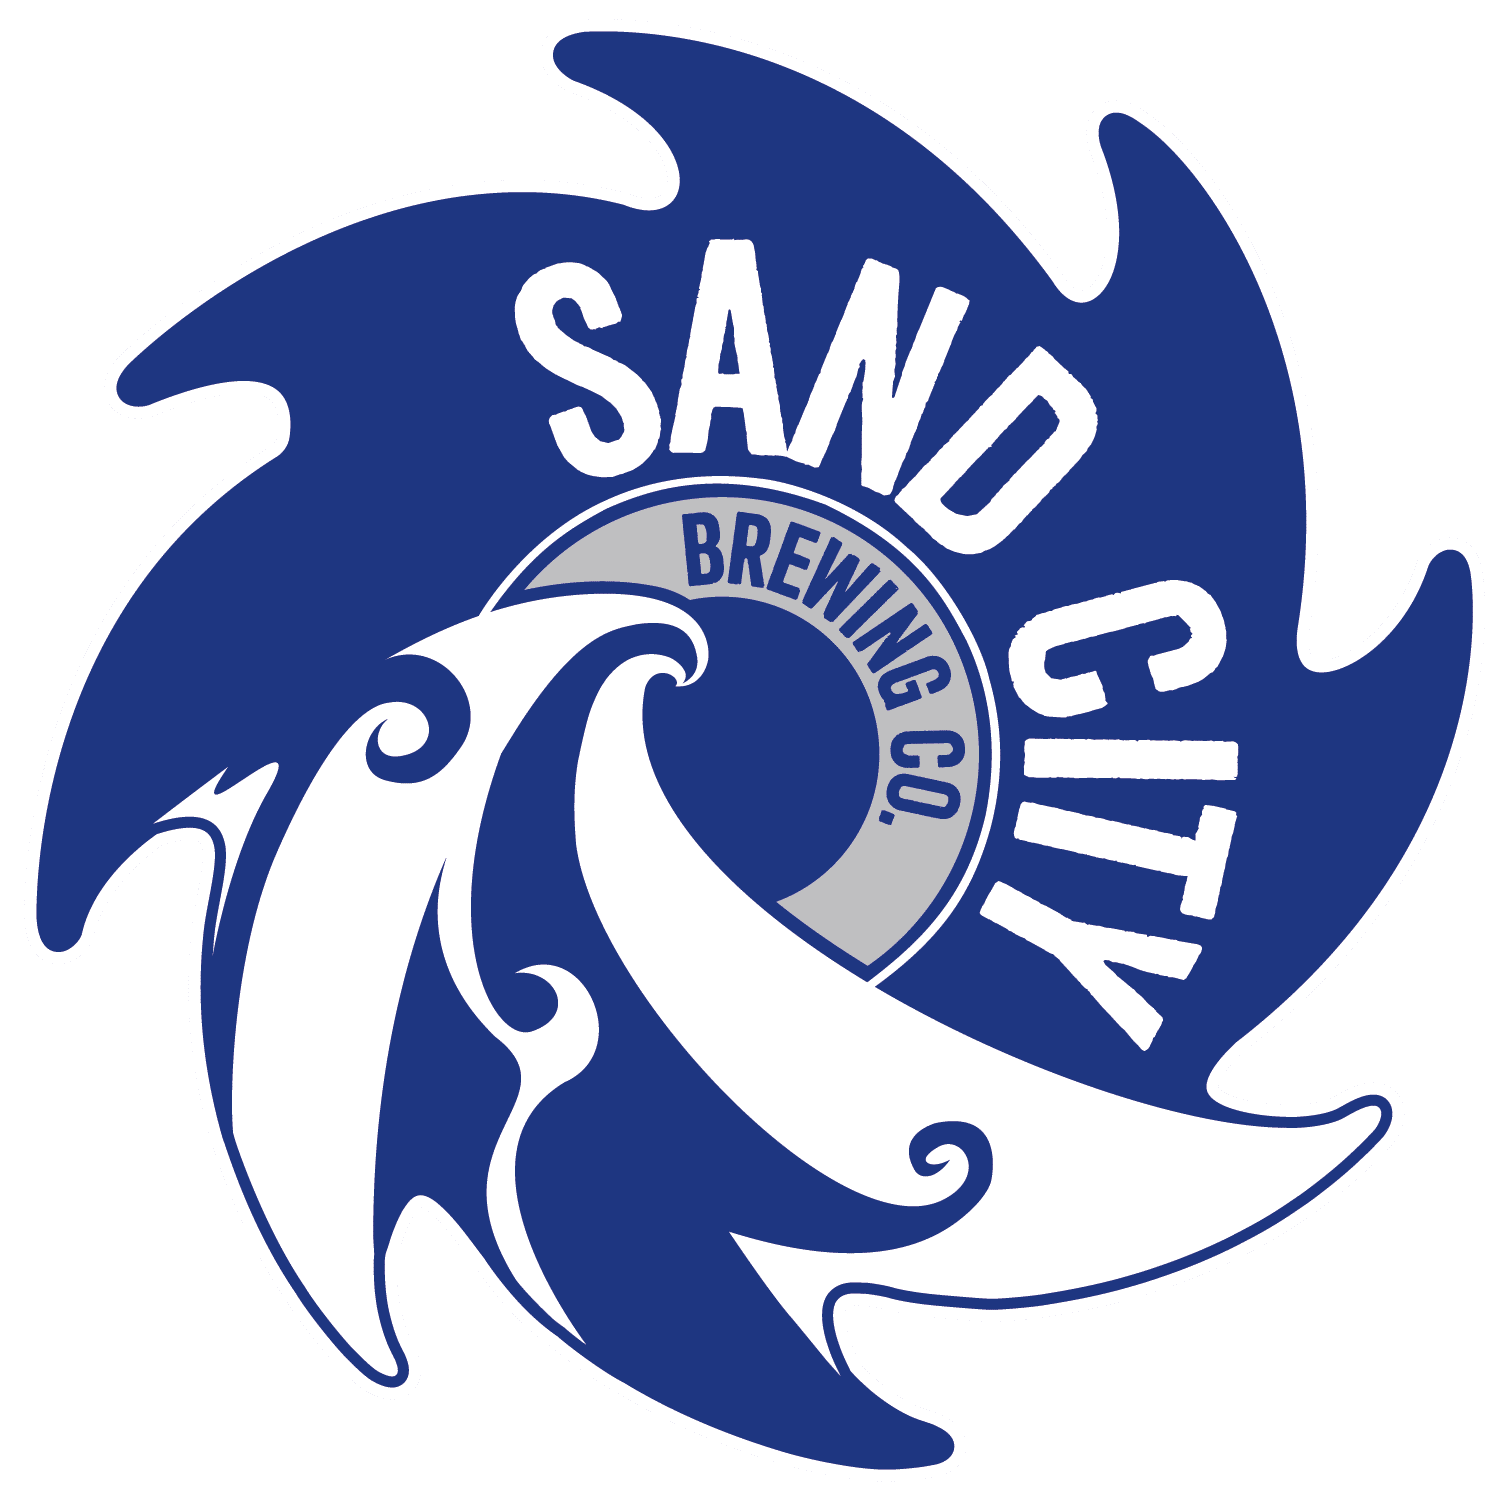 Sand City Brewing Co.